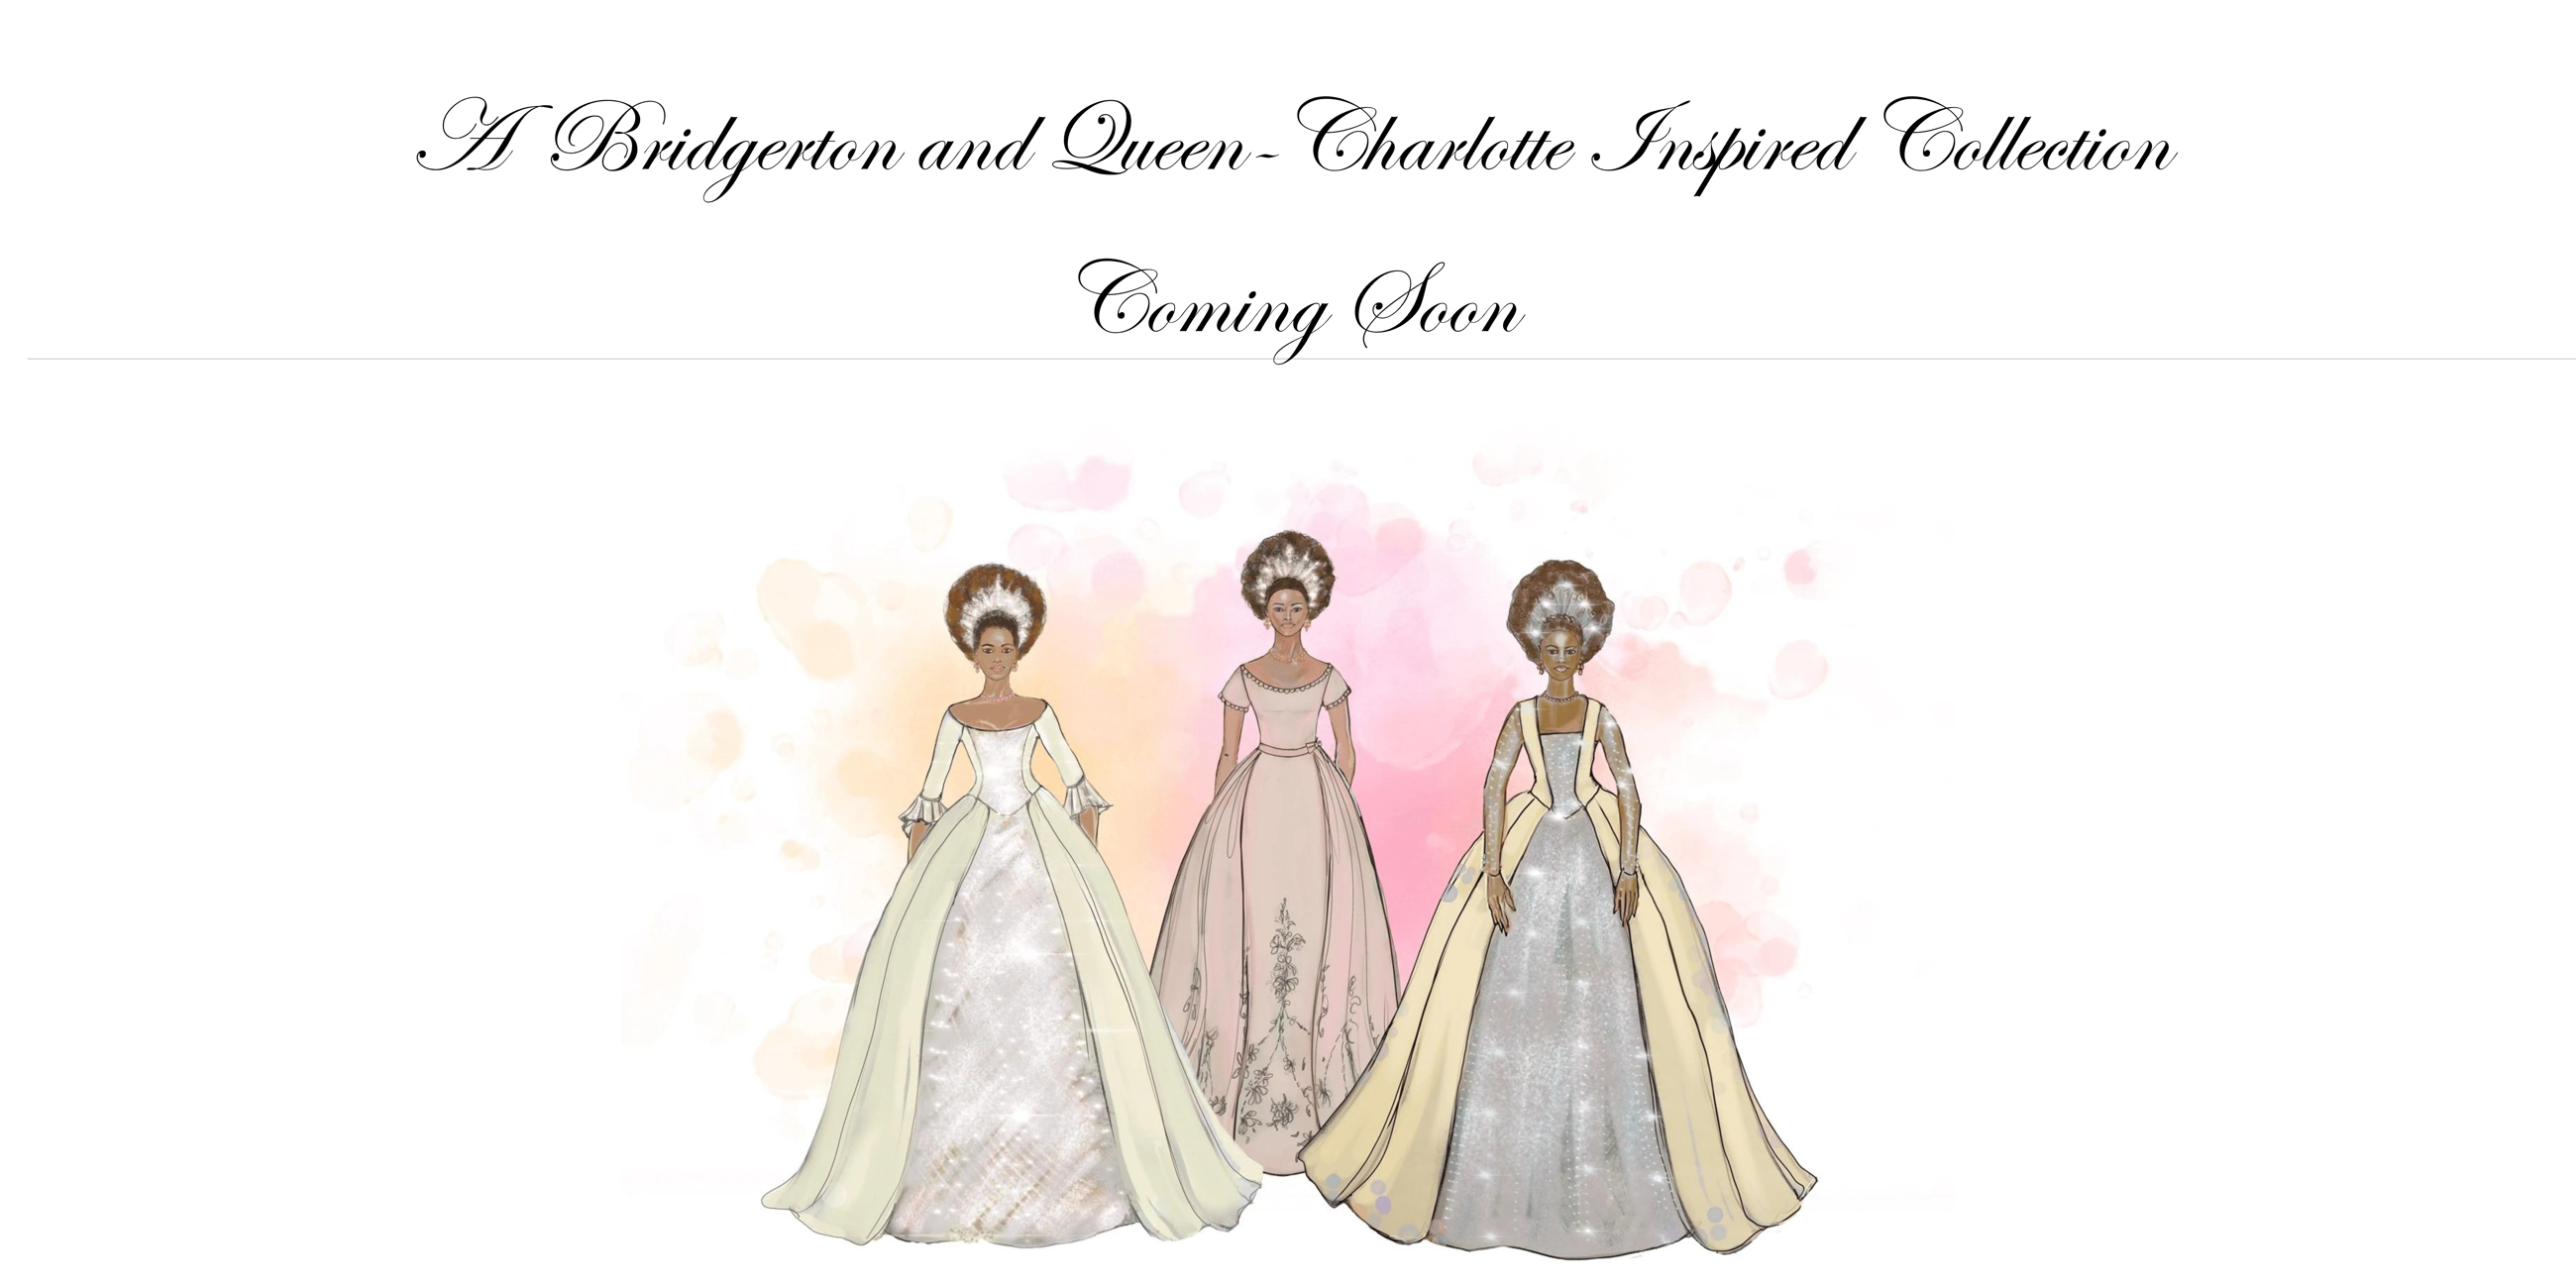 Bridgerton and Queen - Charlotte Inspired Collection